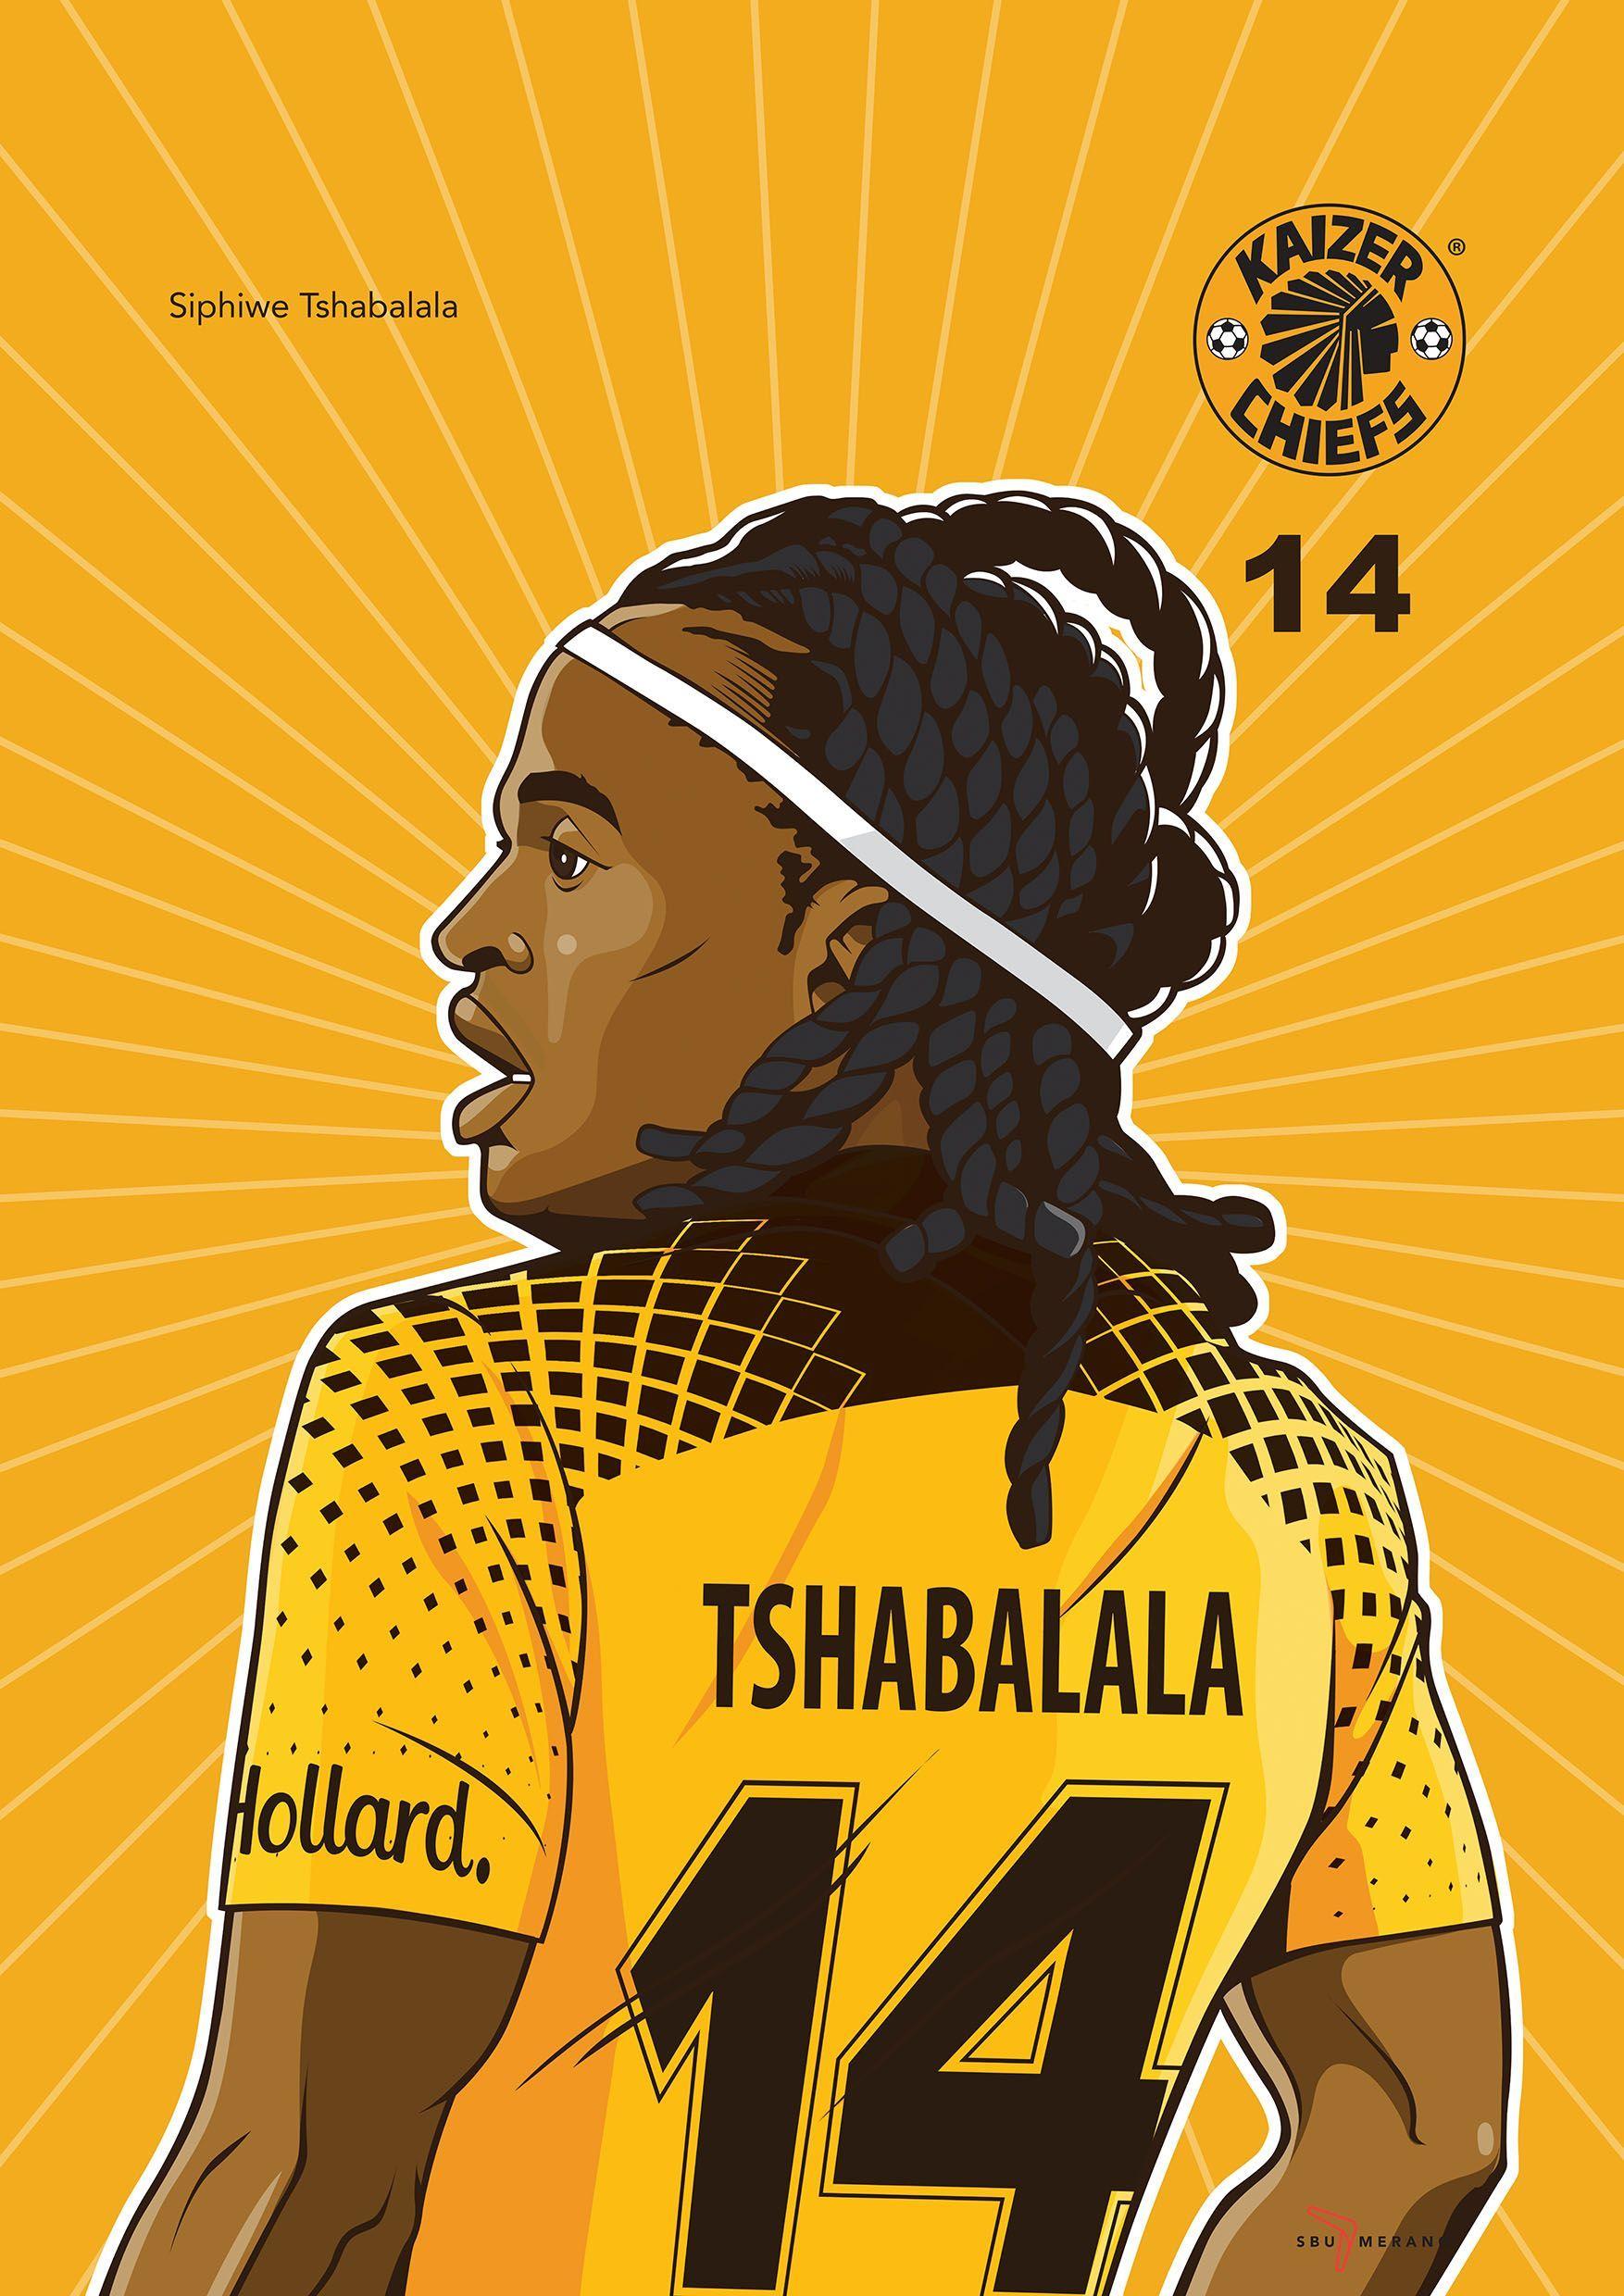 Iwisa Kaizer Chiefs Players_Poster Collection_Siphiwe Tshabalala